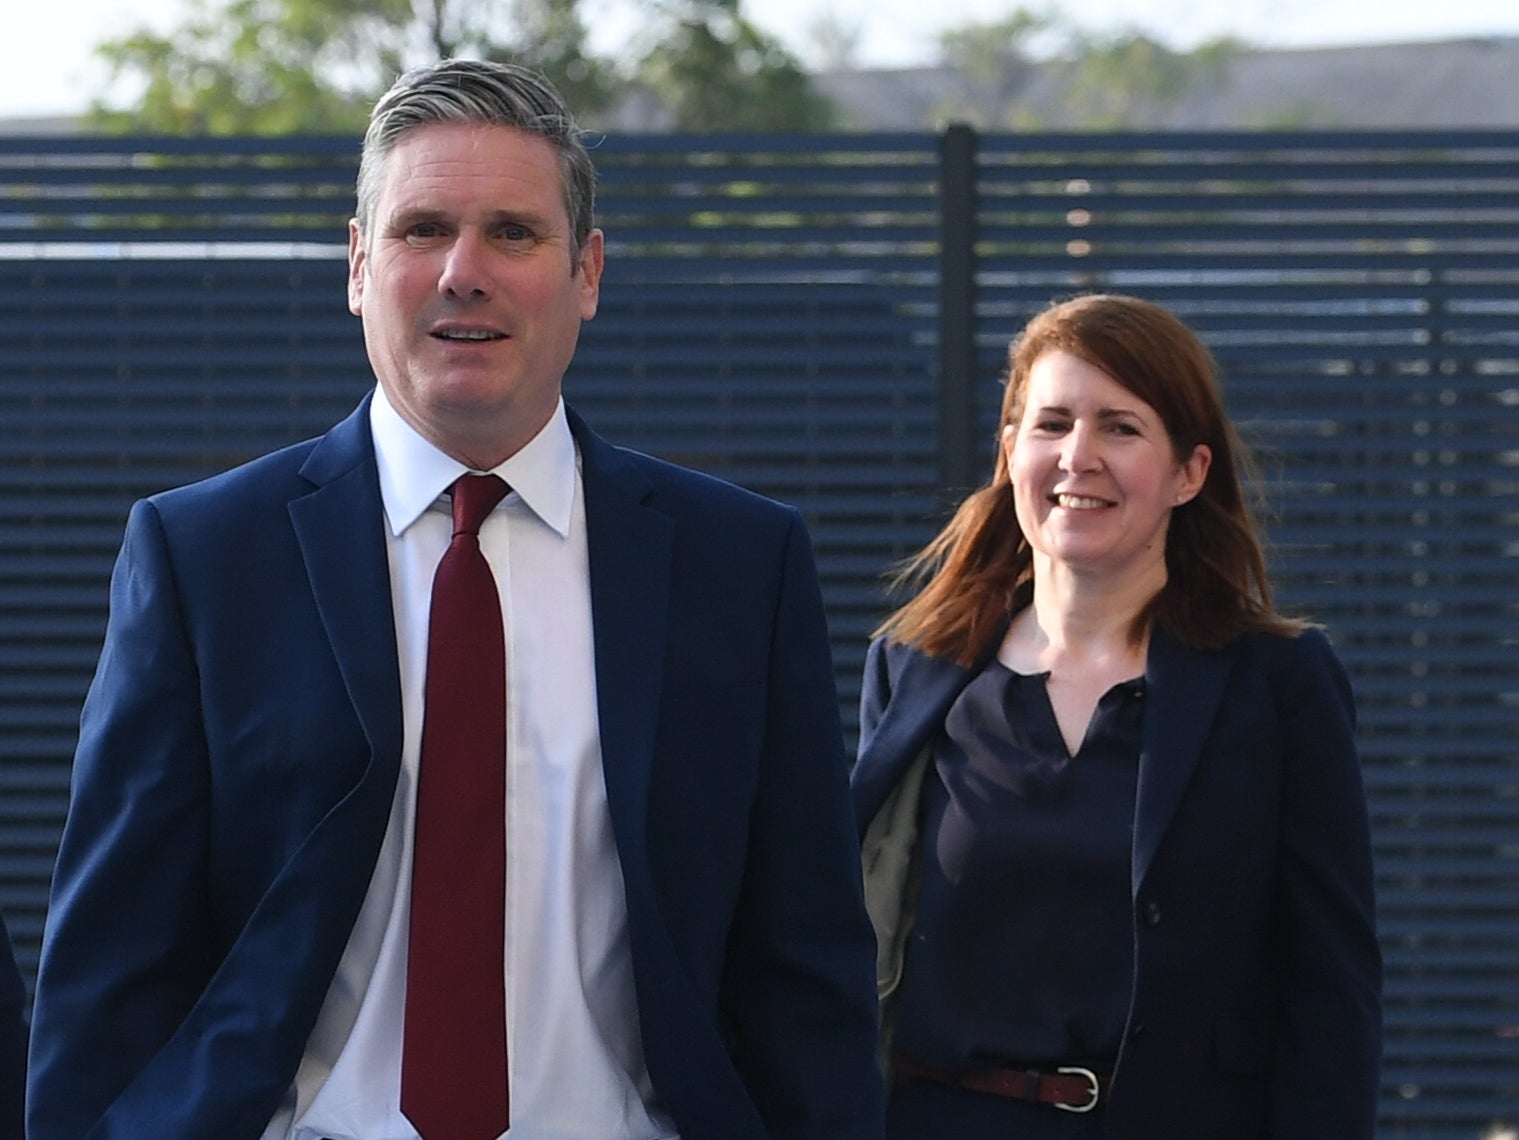 Jenny Chapman pictured with Keir Starmer ahead of the Labour leader’s keynote speech at the party’s online conference in 2020